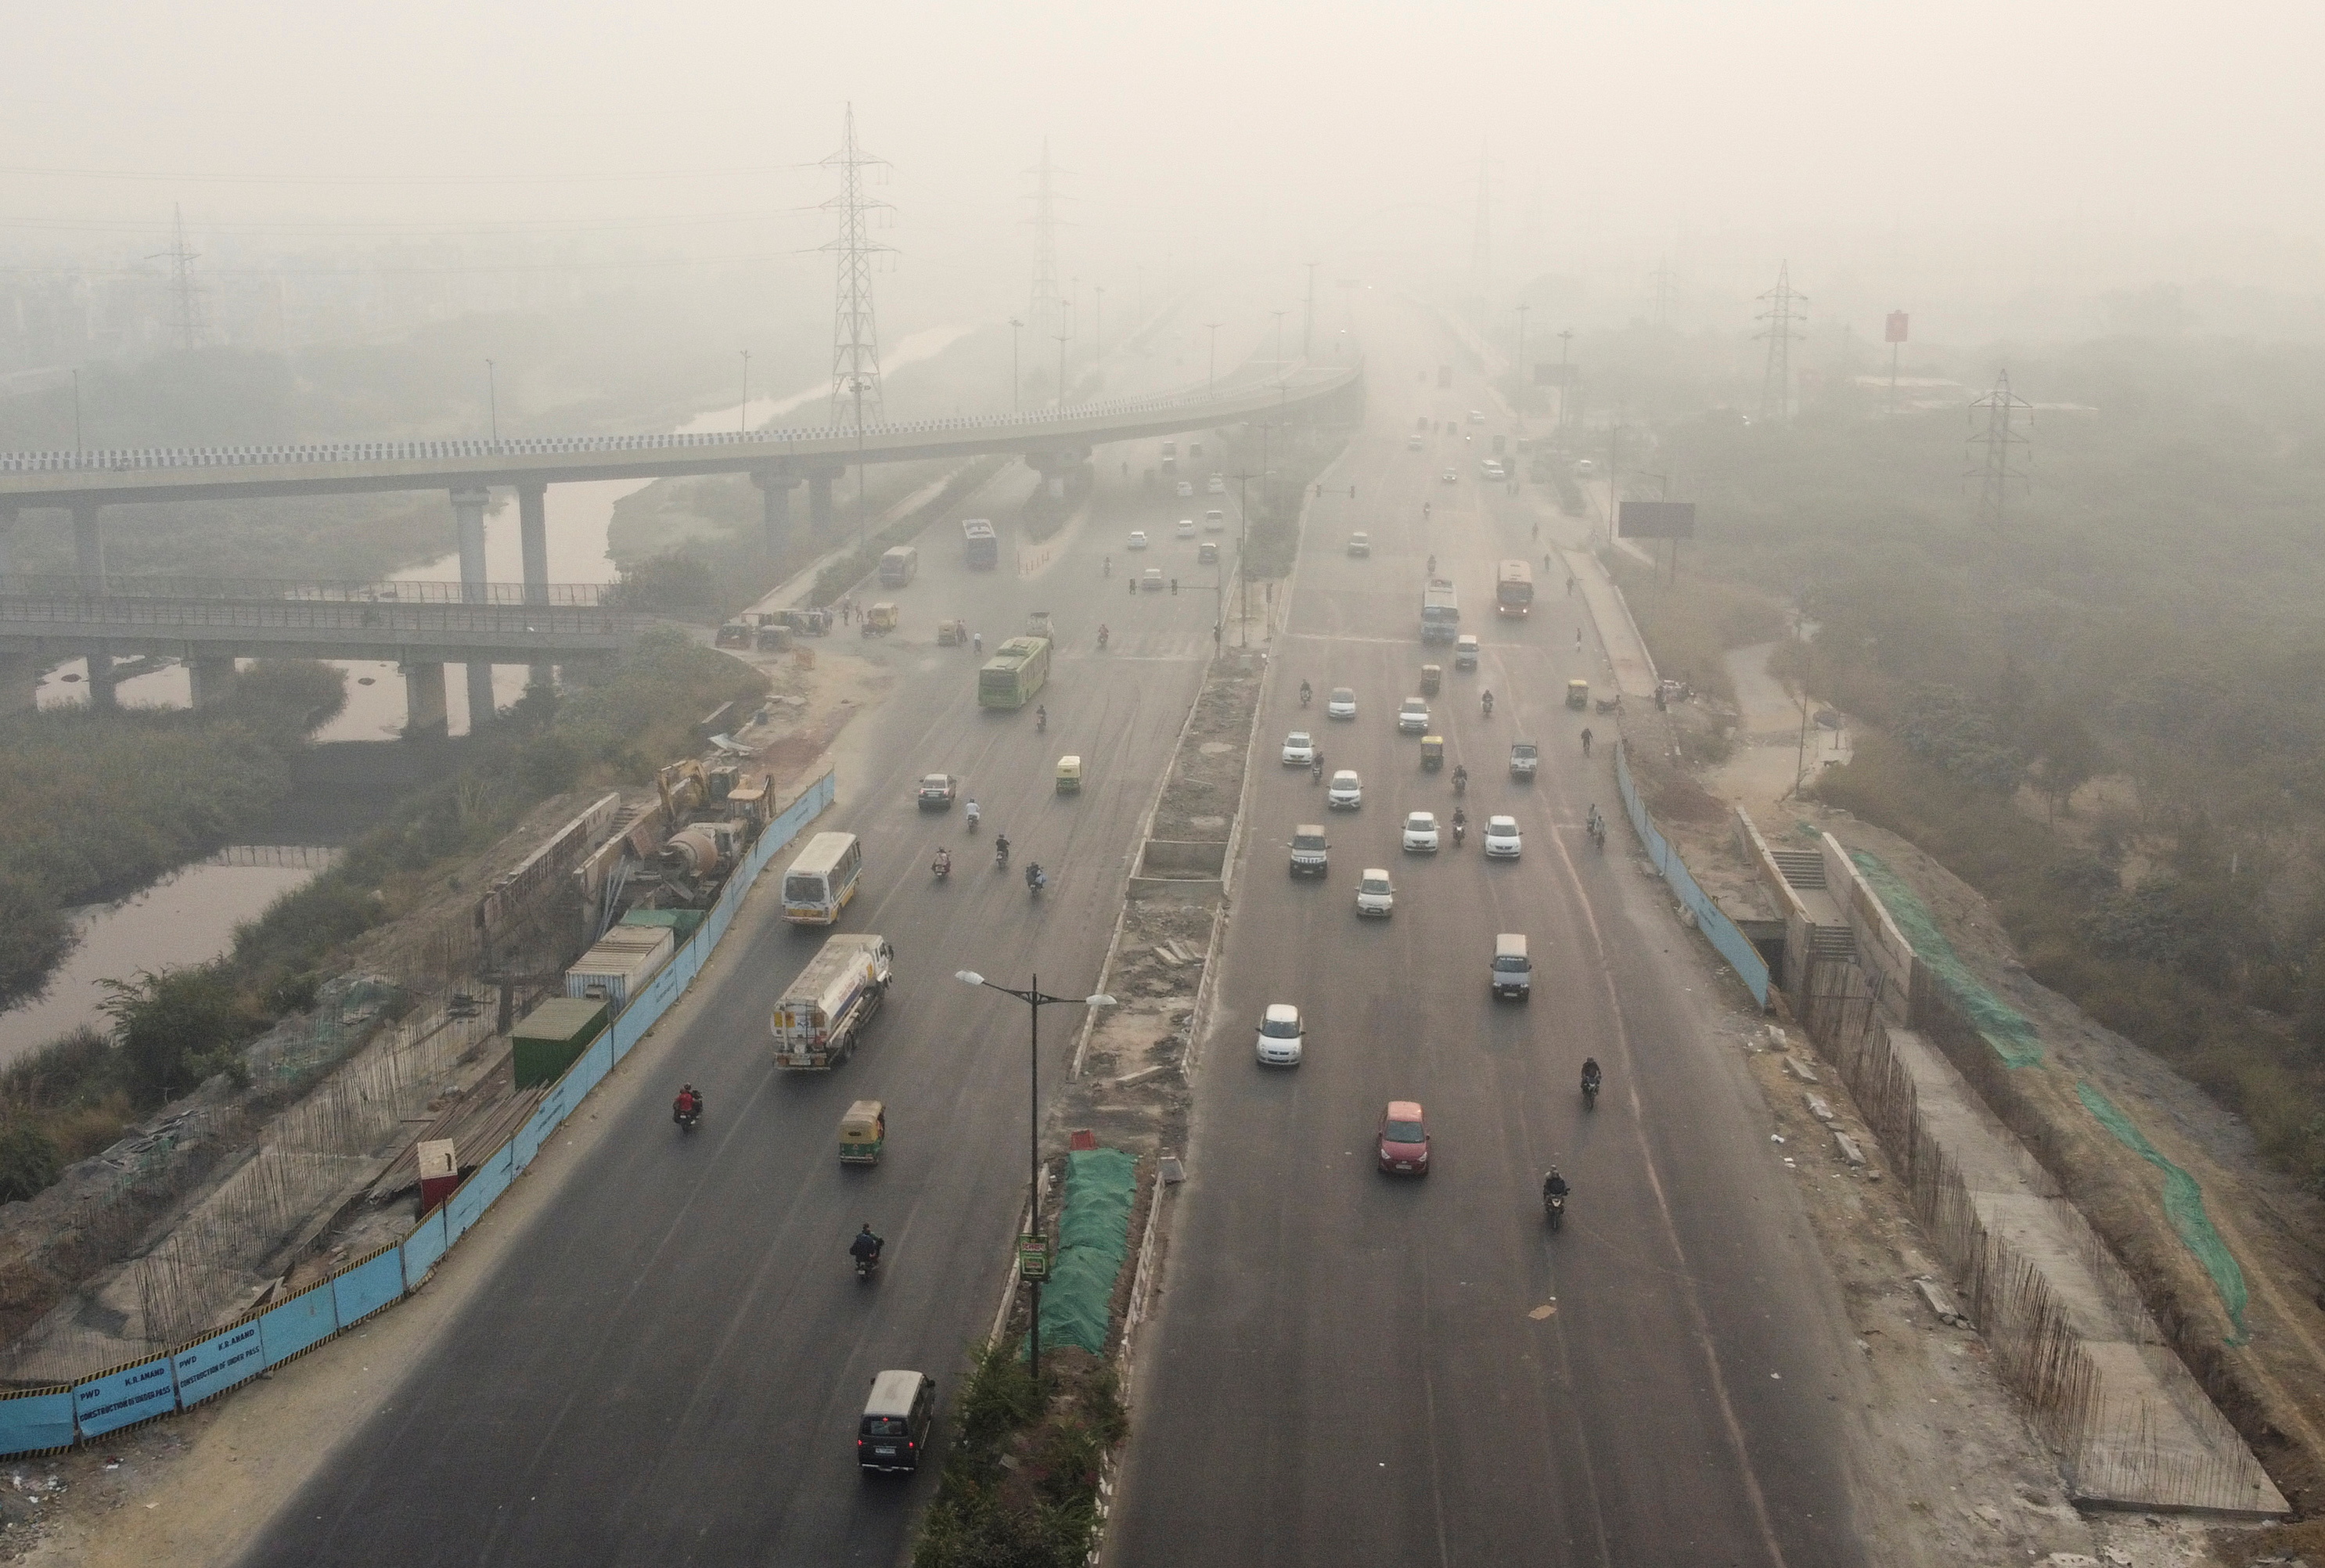 Traffic moves along a highway shrouded in smog in New Delhi, India, November 15, 2020. Picture taken with a drone. REUTERS/Danish Siddiqui